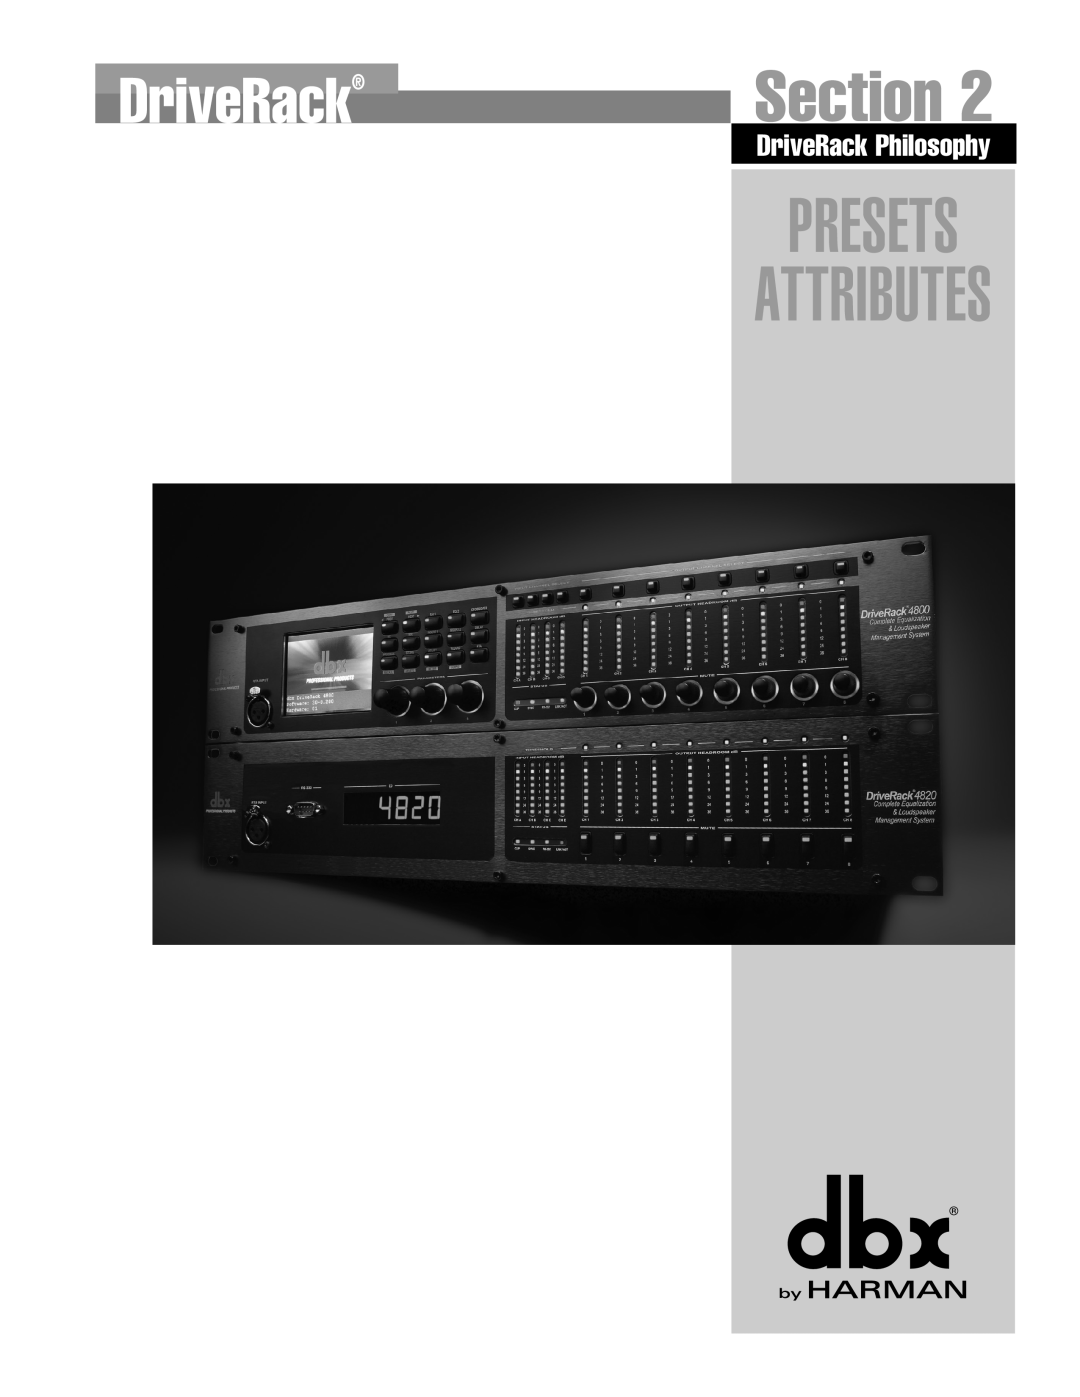 Harman 4820, 4800 user manual Presets, Section, attributes, DriveRack Philosophy 